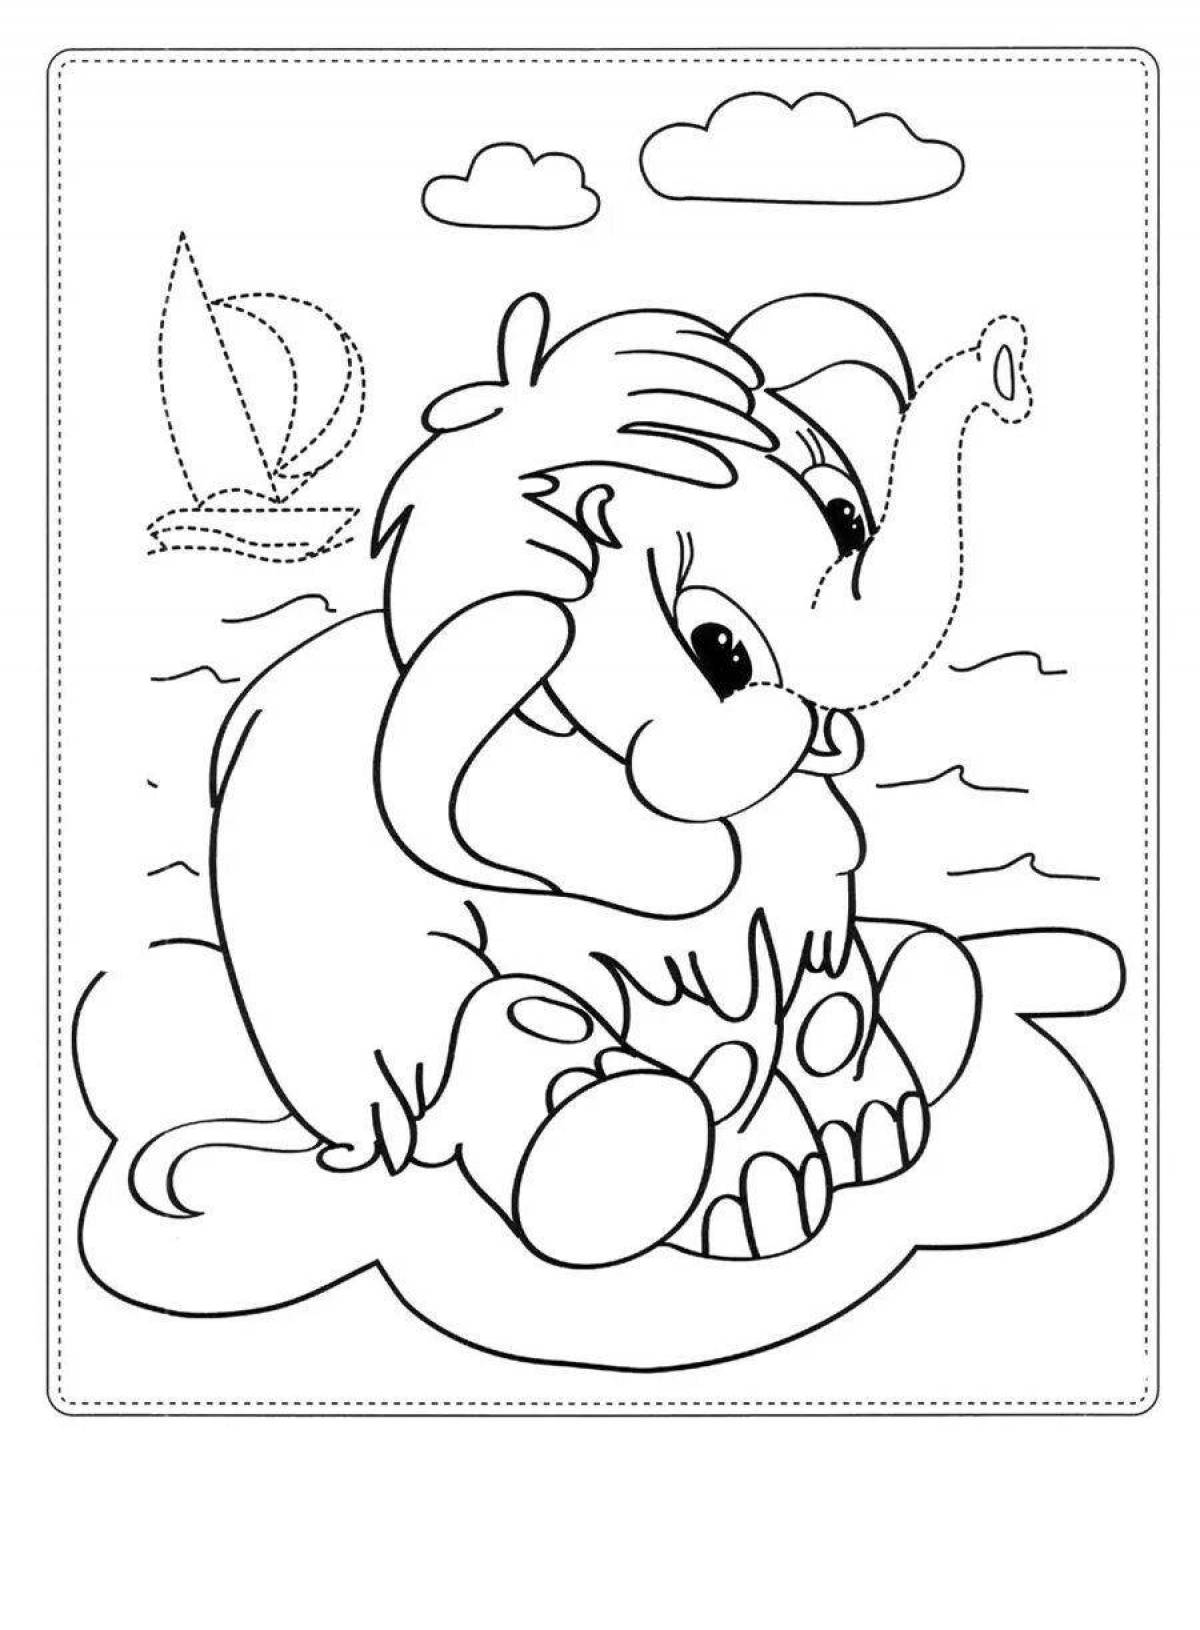 Wonderful mammoth coloring book for kids